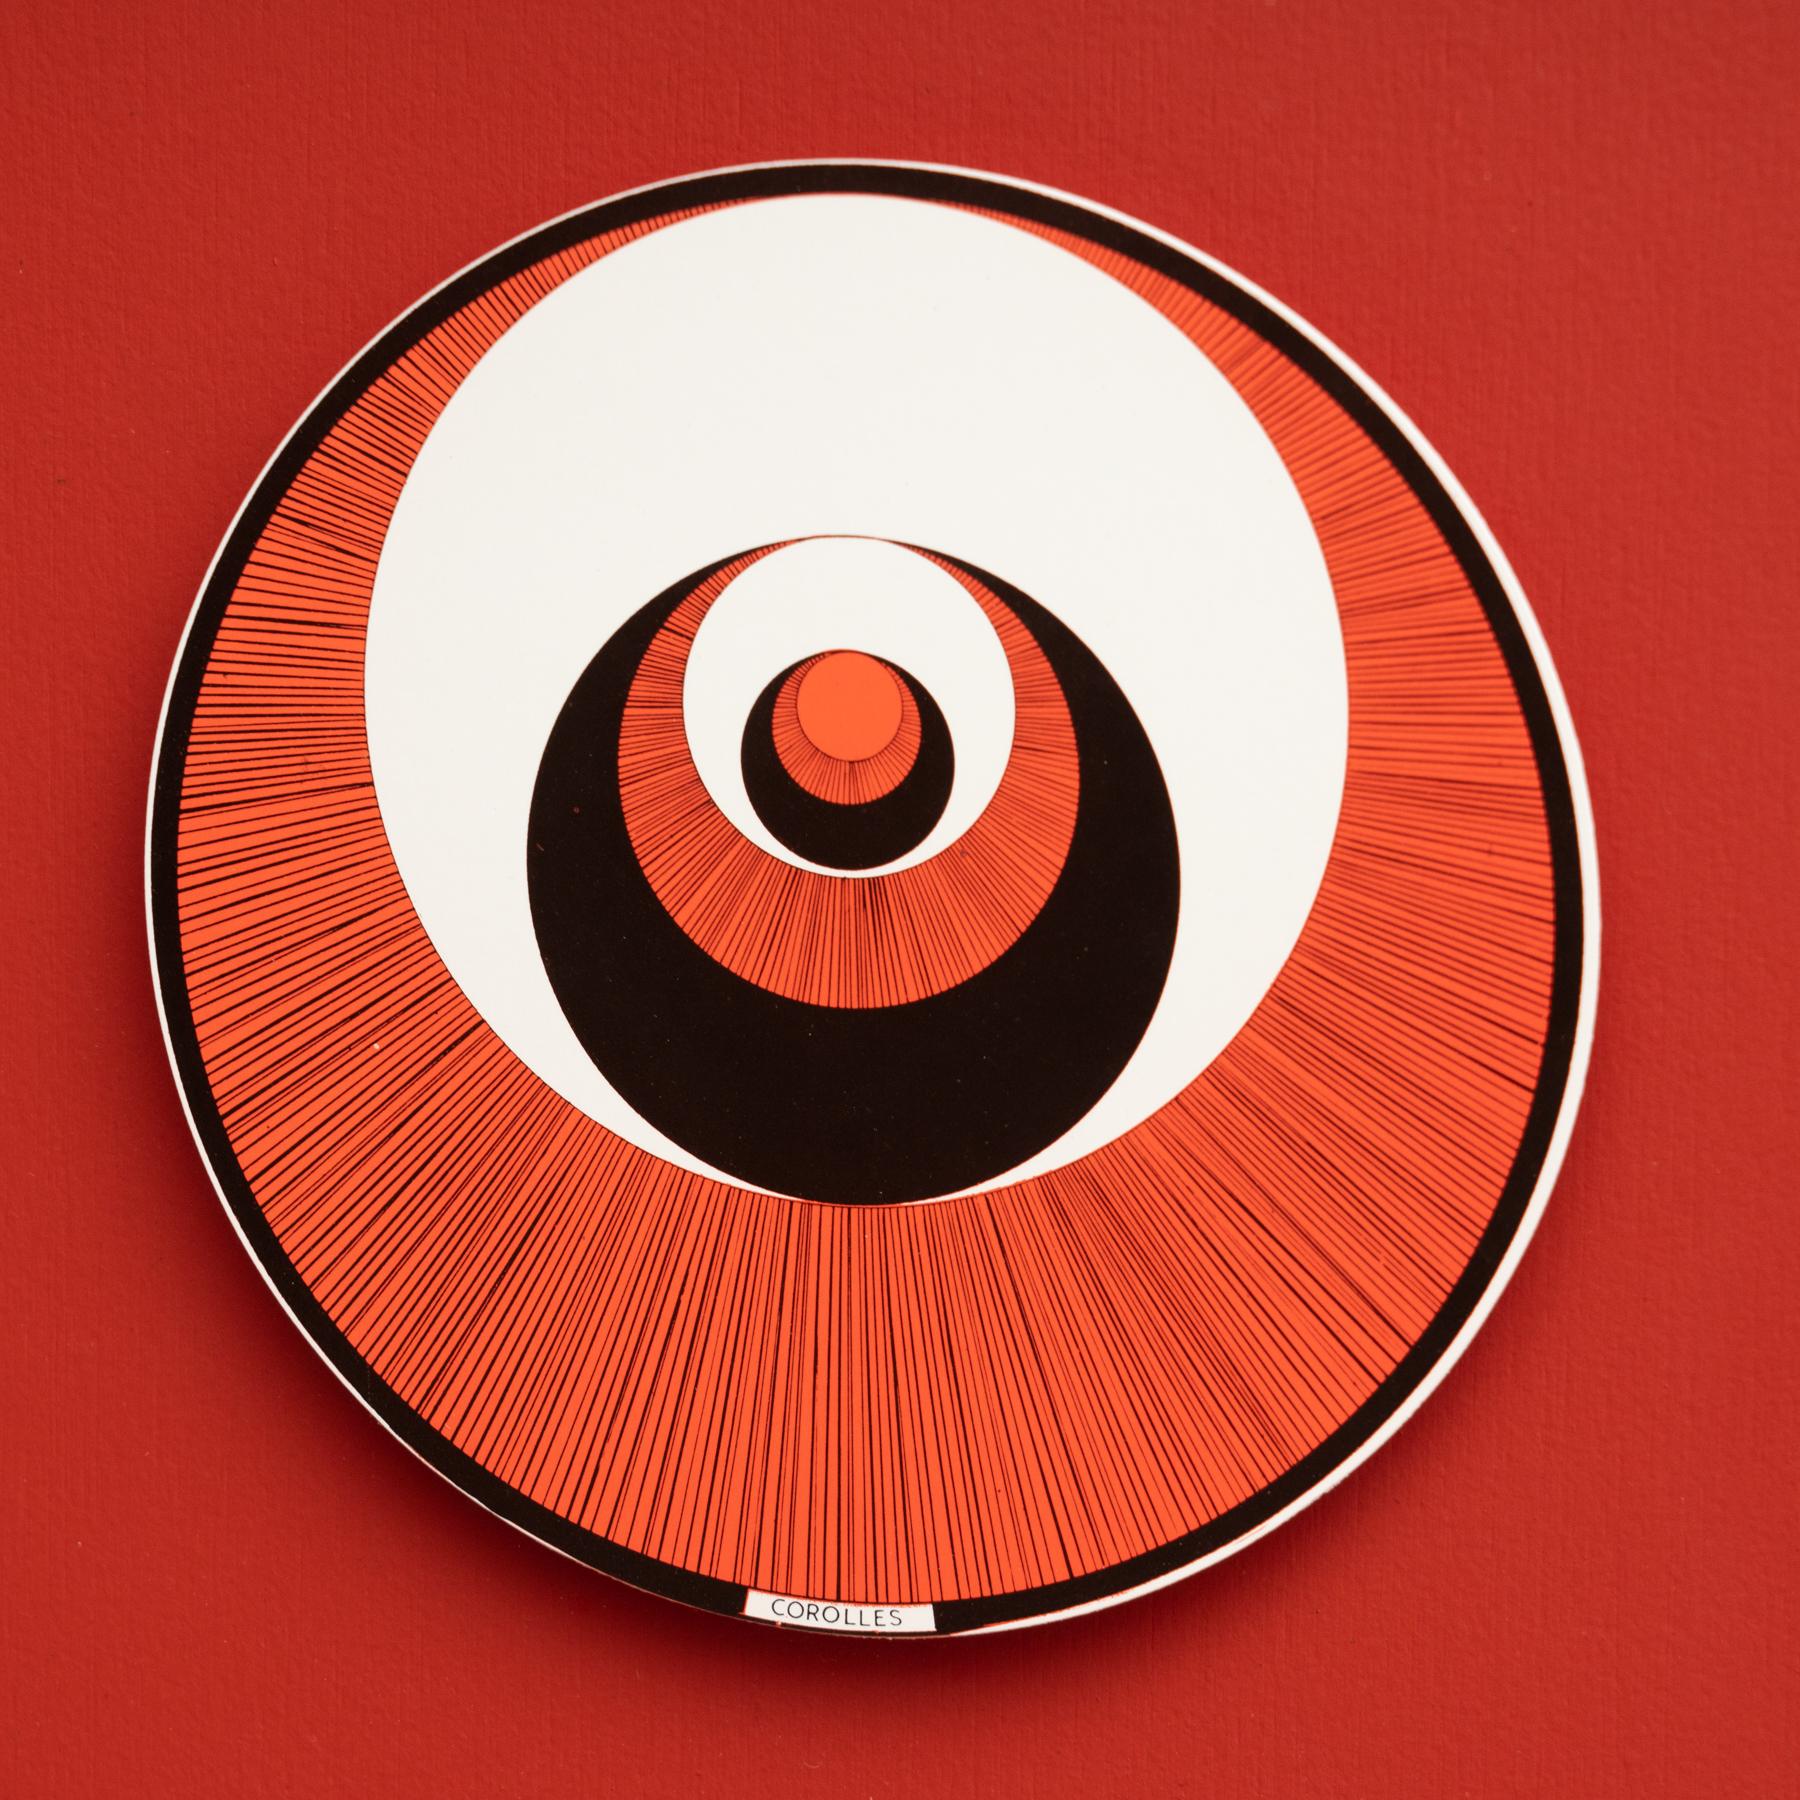 Set of 6 Marcel Duchamp Rotoreliefs Red Frmaed by Konig Series 133, 1987 For Sale 1